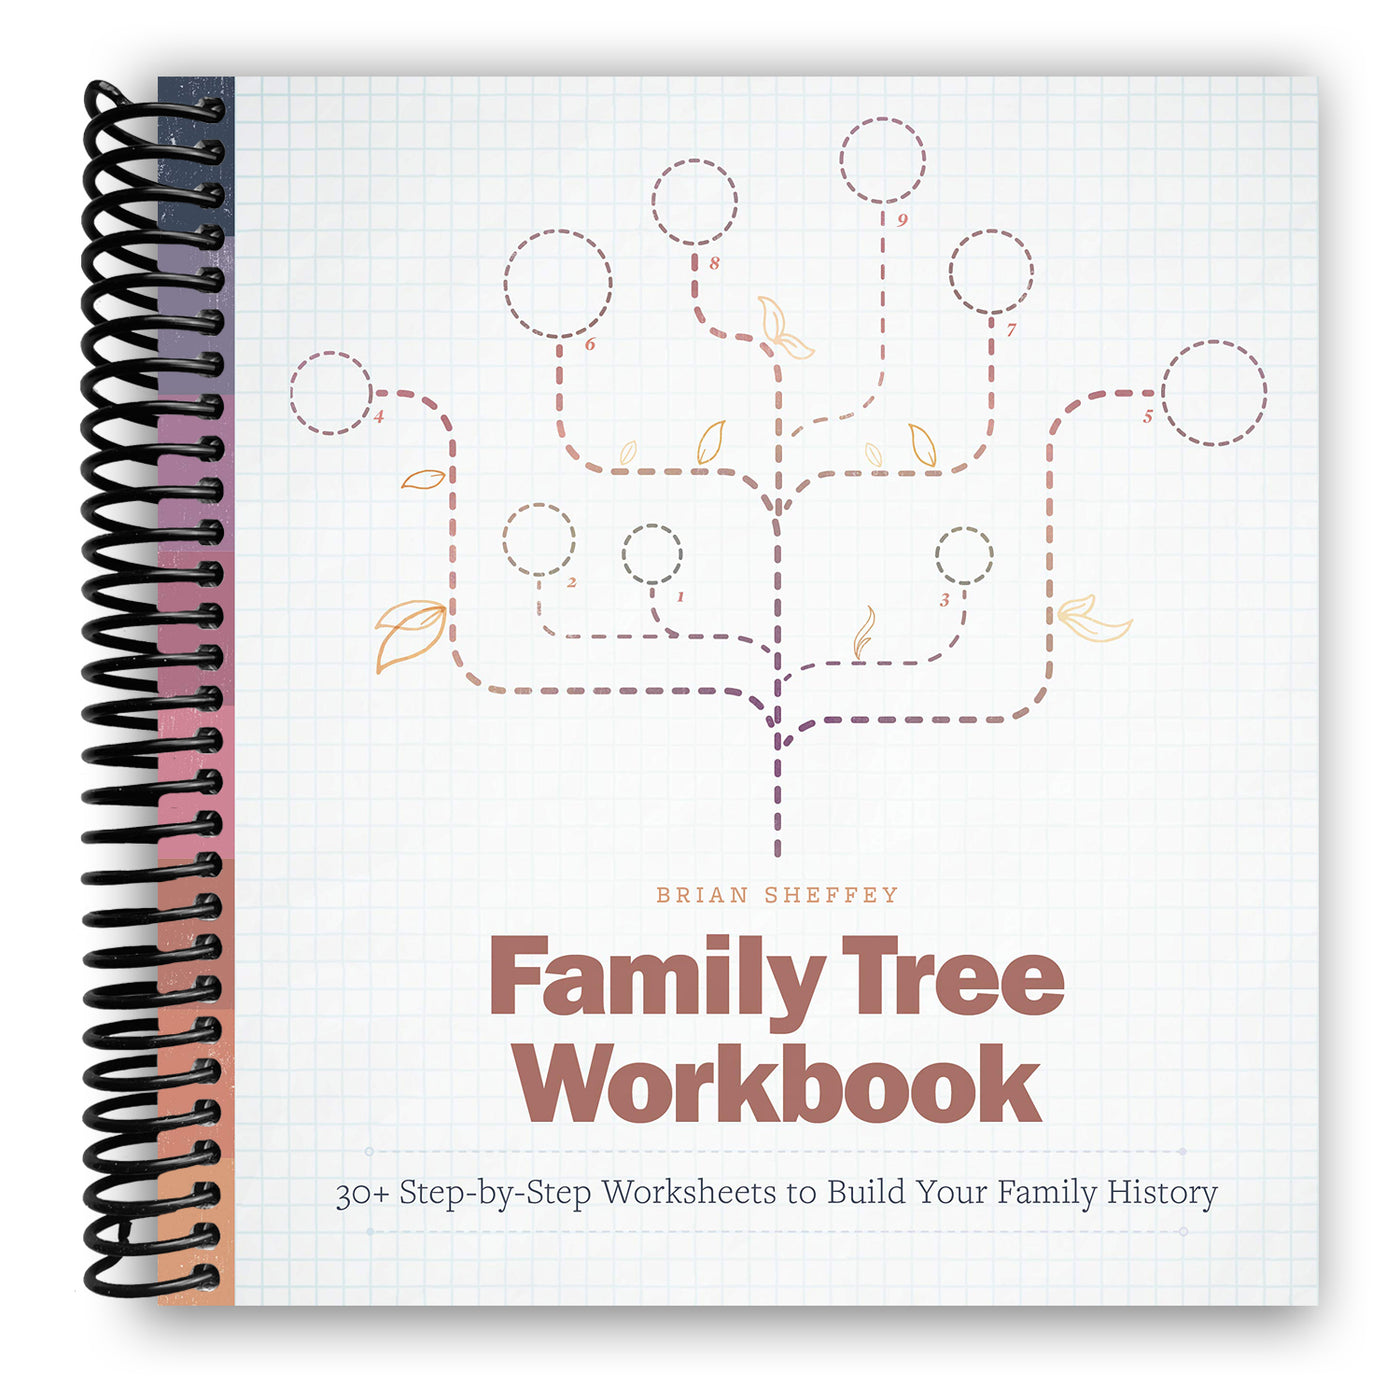 Family Tree Workbook: 30+ Step-by-Step Worksheets to Build Your Family History (Spiral Bound)